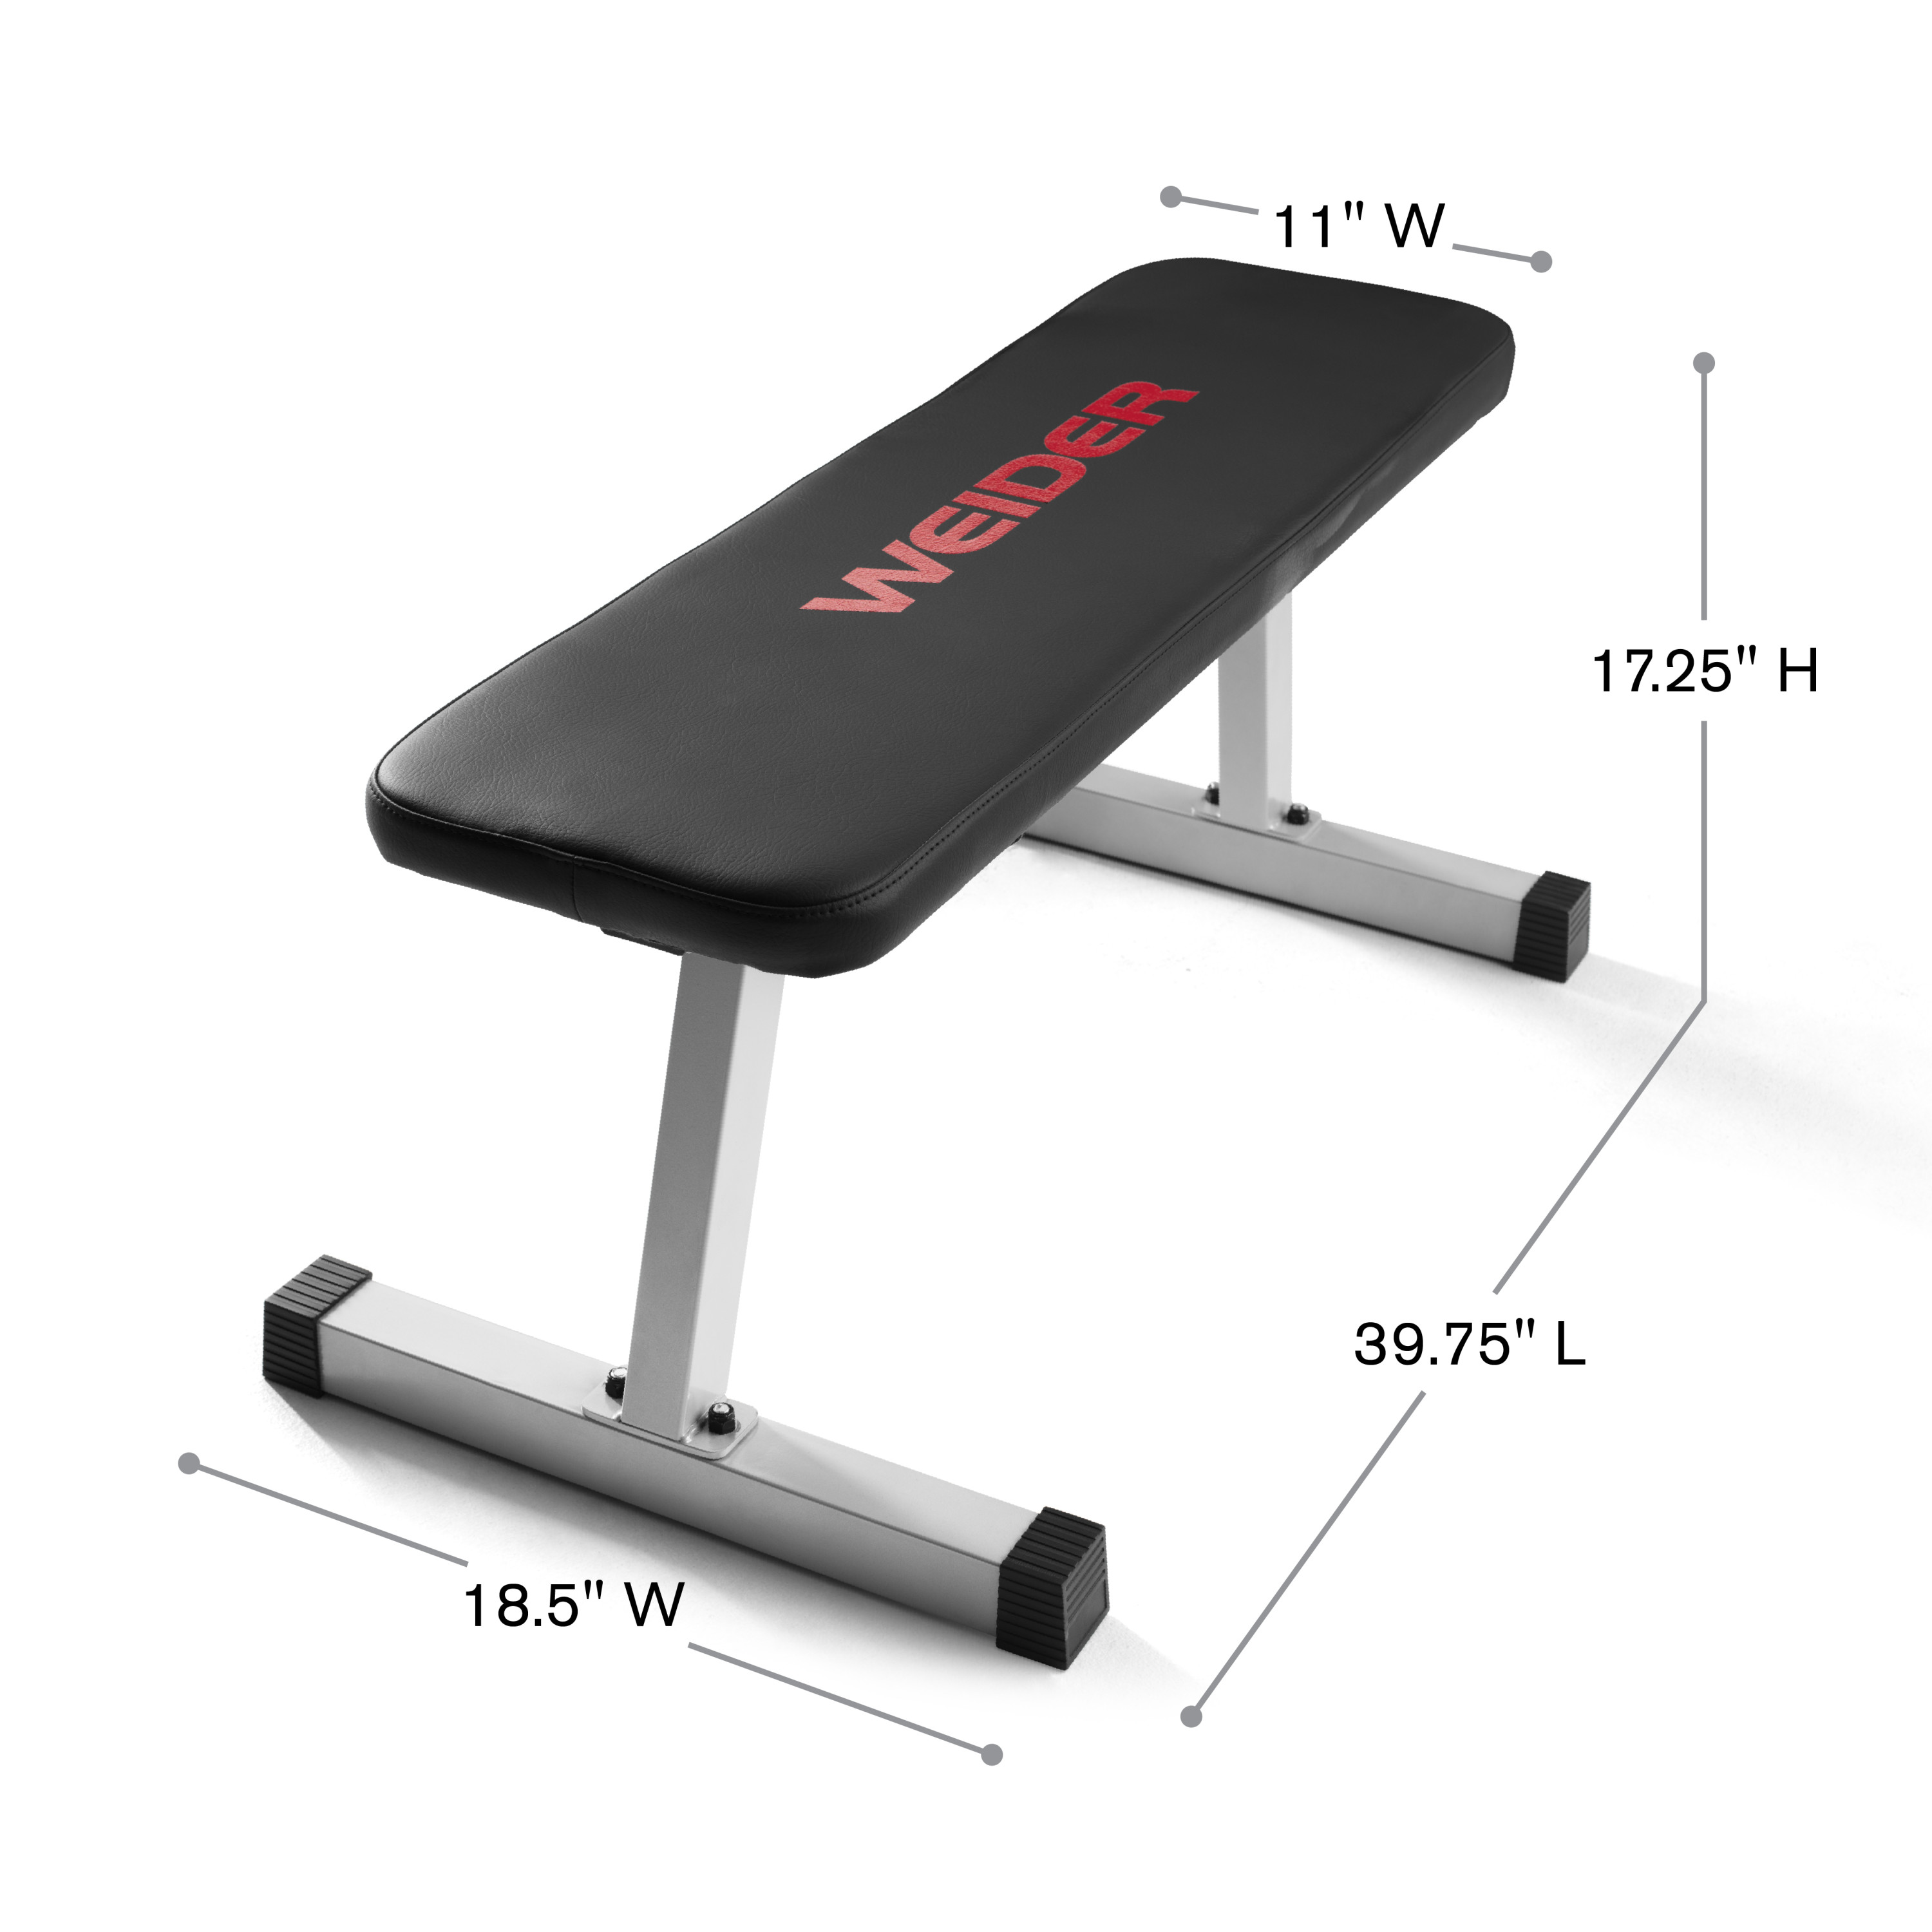 Weider Traditional Flat Bench with a Sewn Vinyl Seat, 460 lb. Weight Limit - image 5 of 13